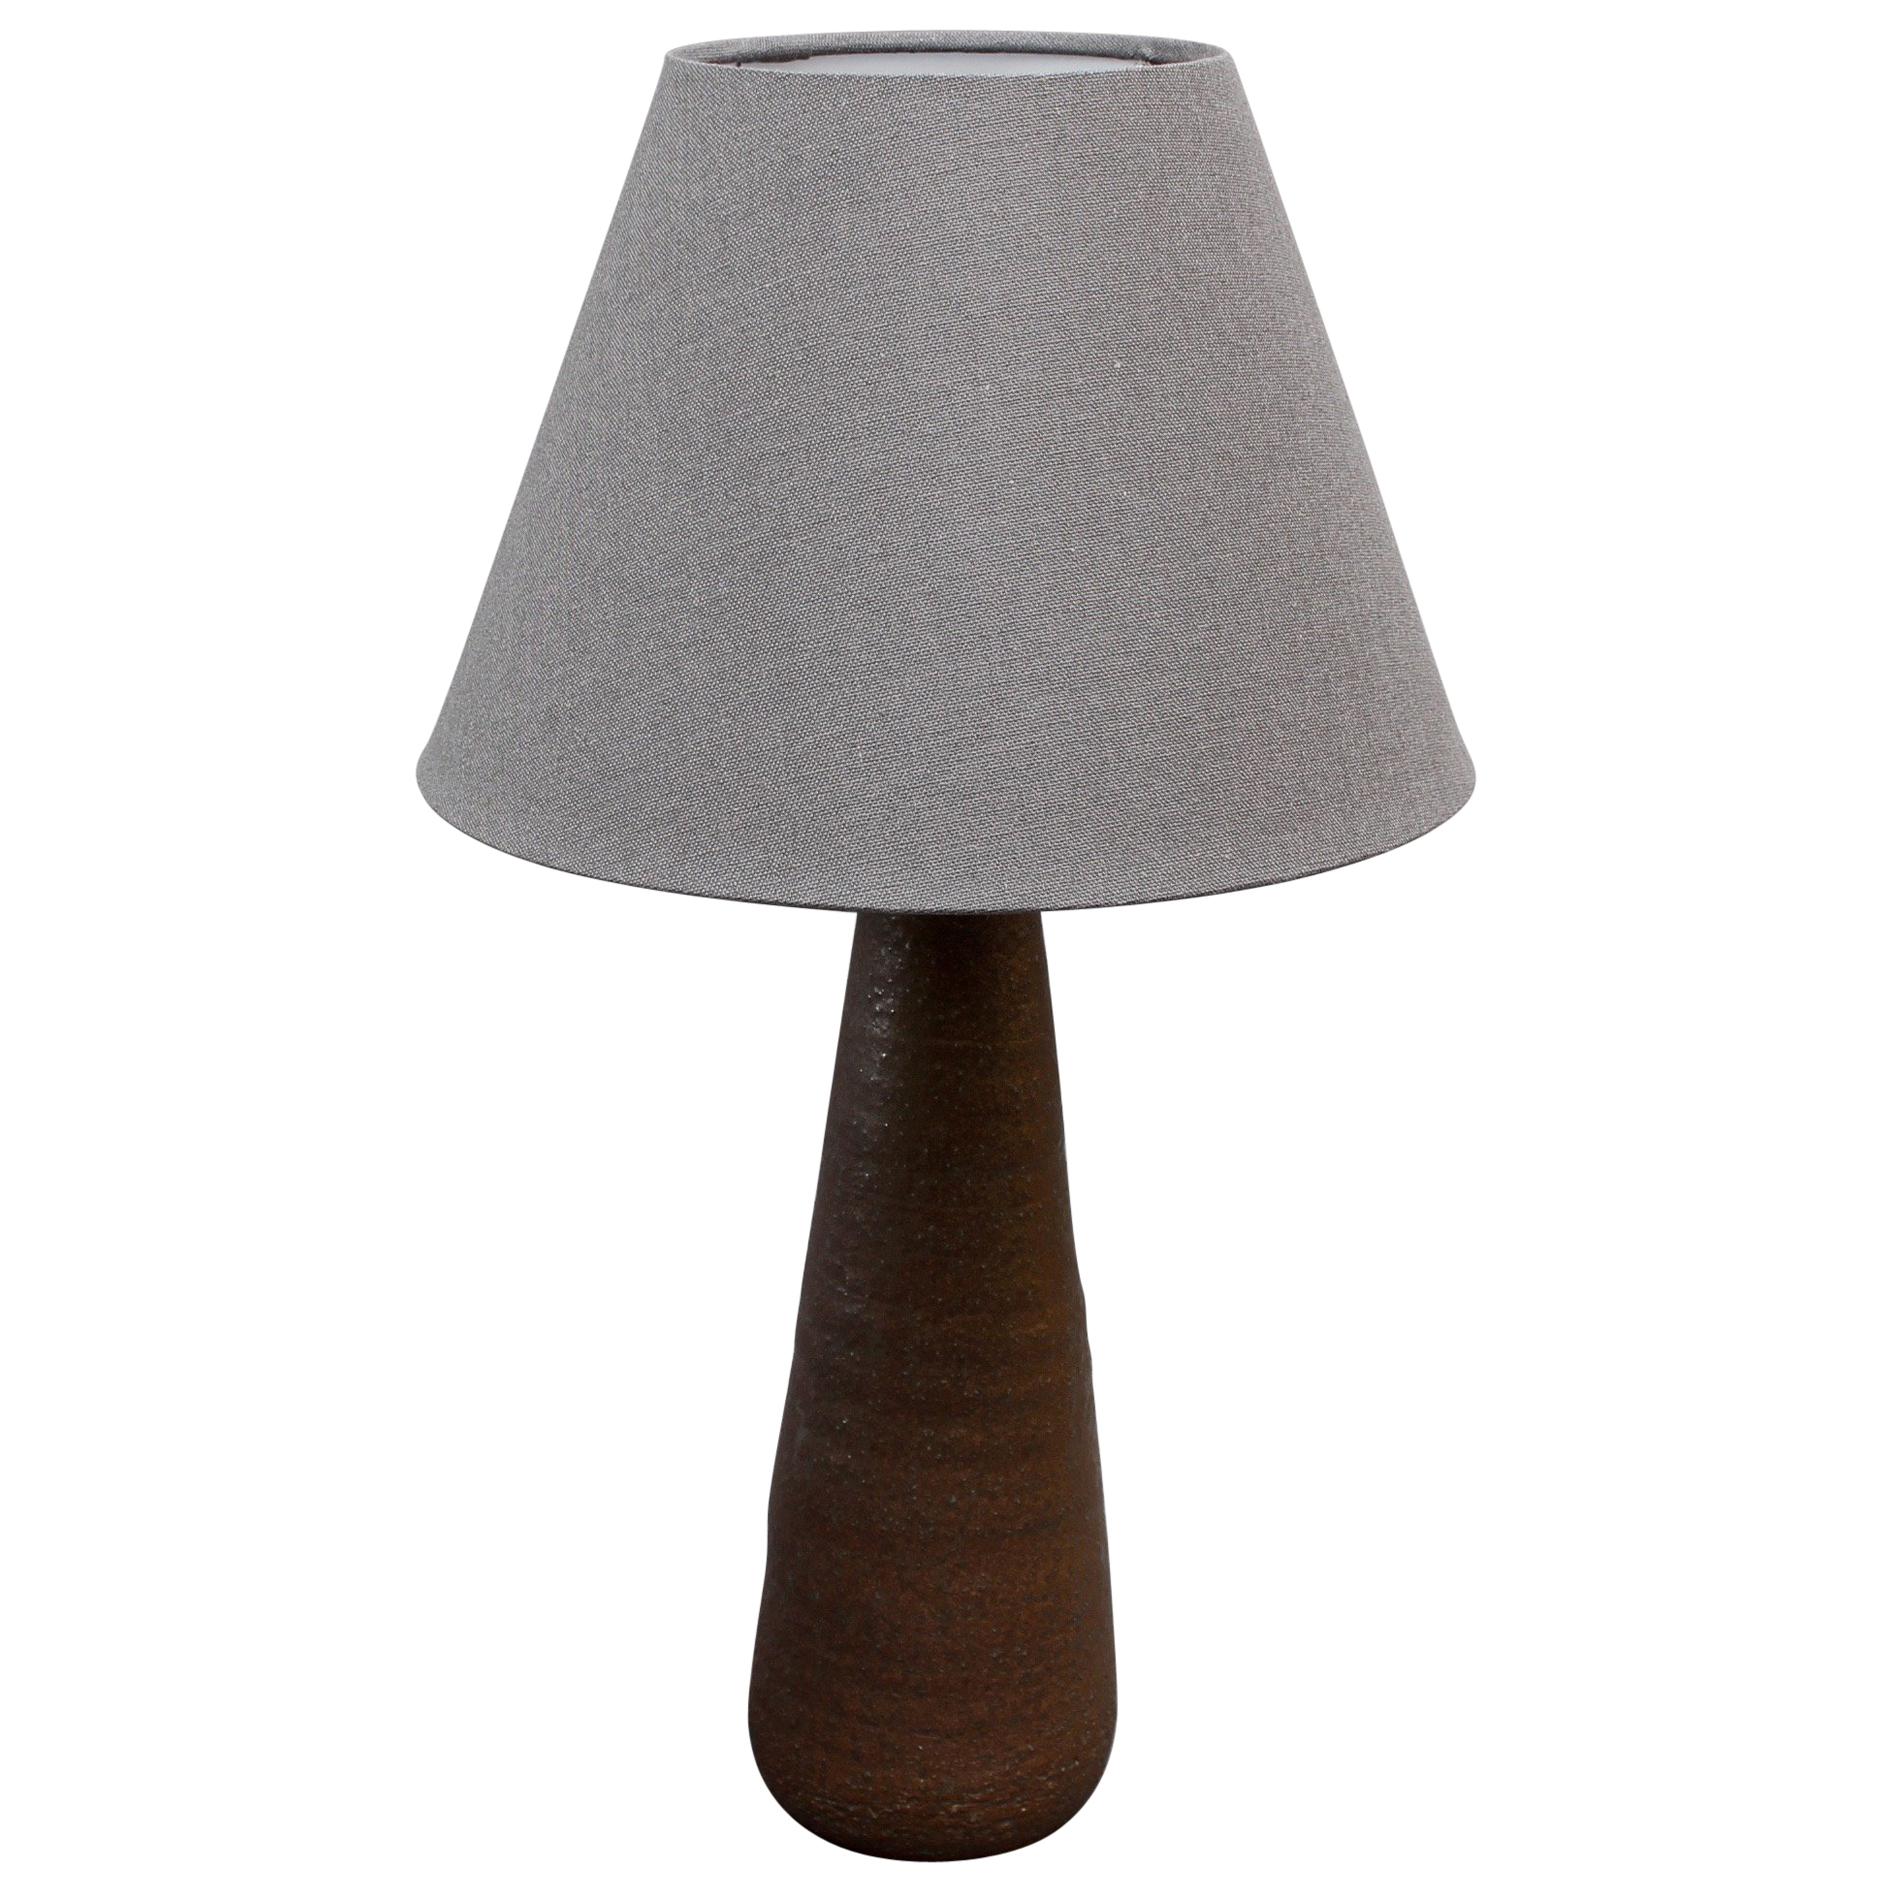 Midcentury French Conical Shaped Ceramic Table Lamp by Jean Rivier, circa 1960s For Sale